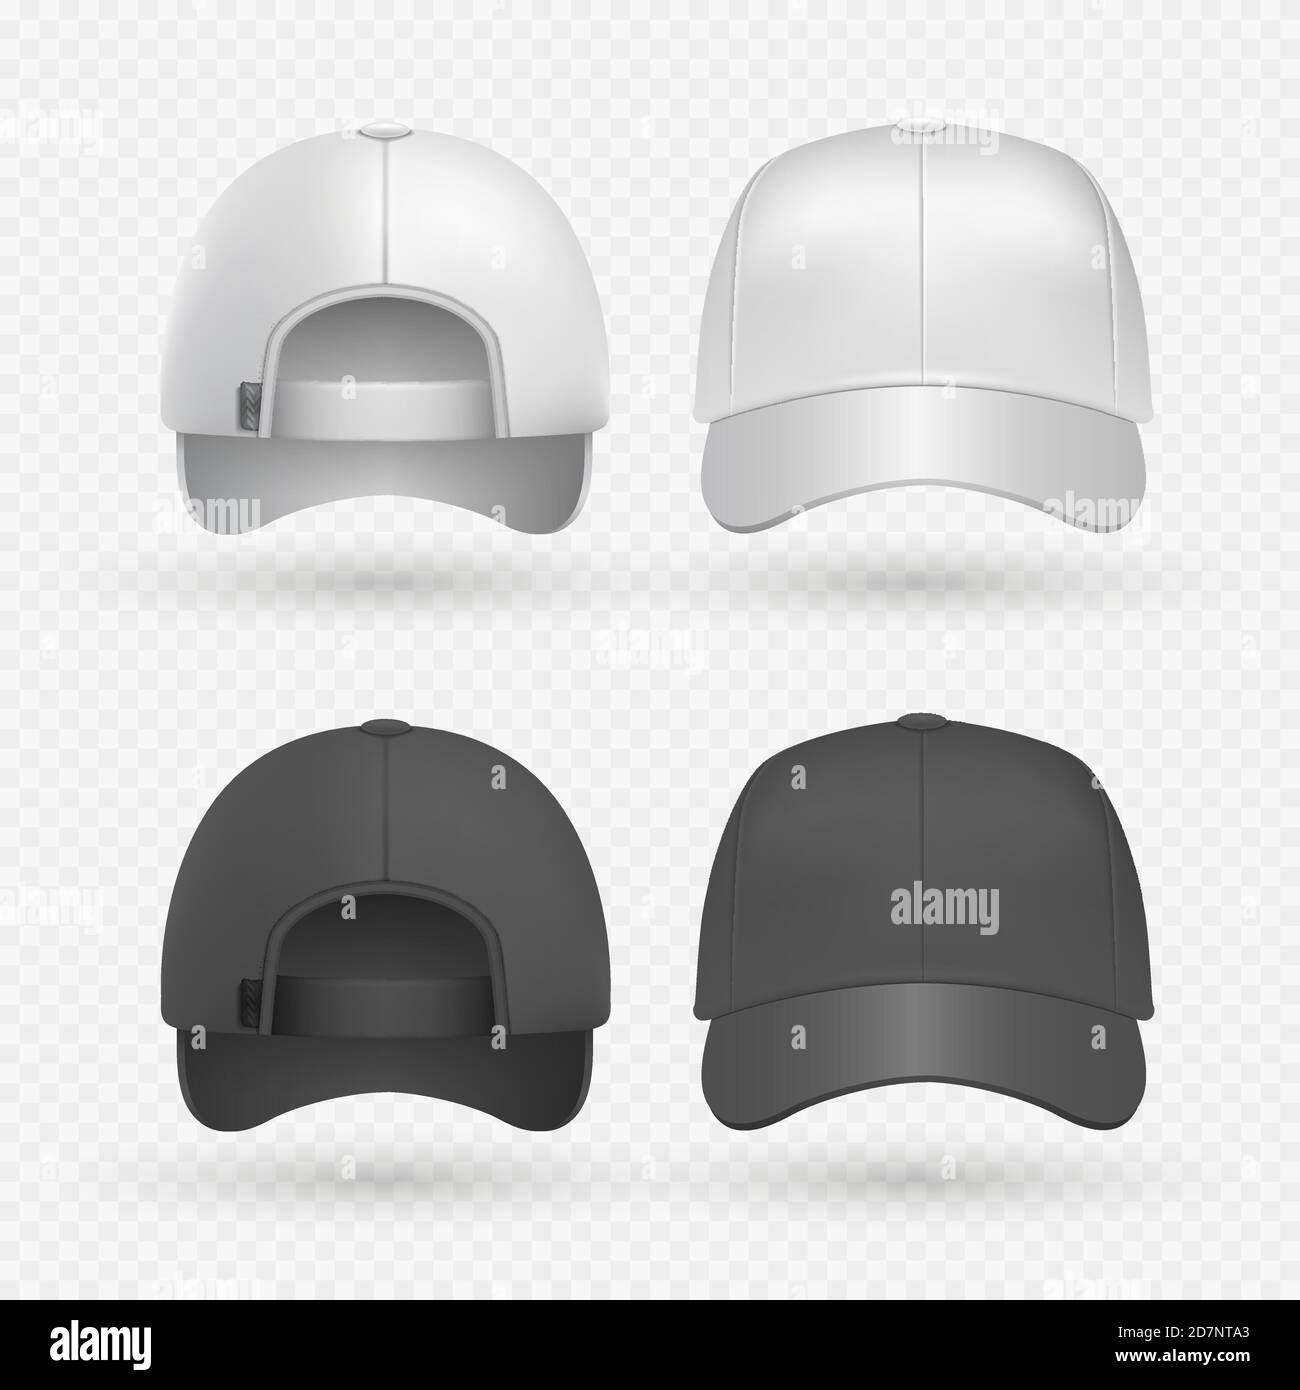 Realistic black and white sport caps isolated on transparent background. Baseball hat design templates vector illustration Stock Vector